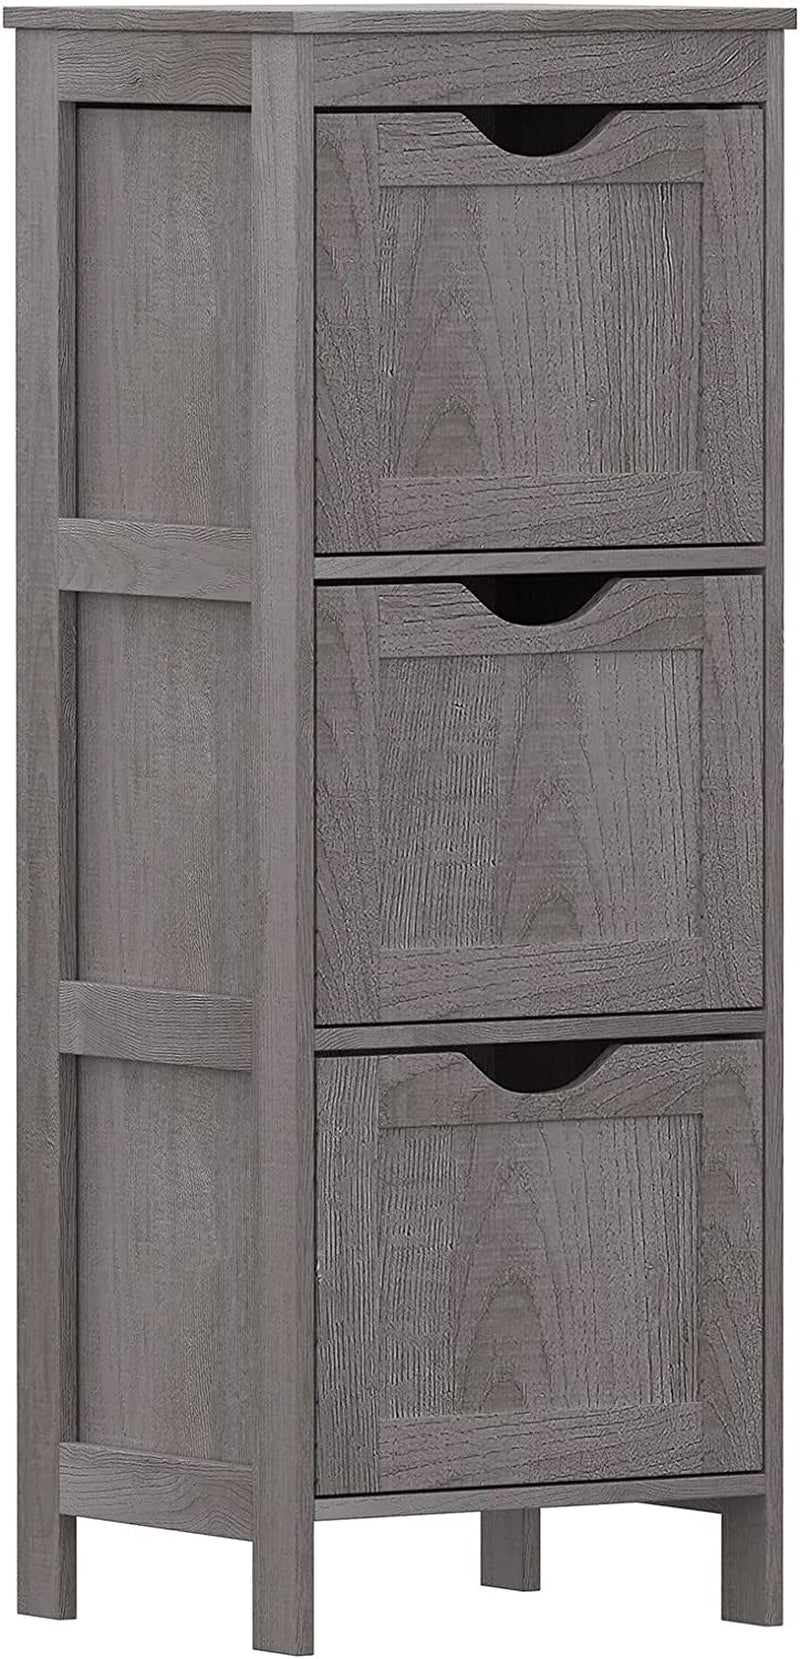 Reettic Narrow Bathroom Storage Cabinet with 3 Removable Drawers, DIY, Free Standing Side Storage Organizer for Bedroom, Living Room, Entryway, 11.8" L X 11.8" W X 35" H, Black BYSG102B Home & Garden > Household Supplies > Storage & Organization Reettic Grey 11.8"L x 11.8"W x 35"H 